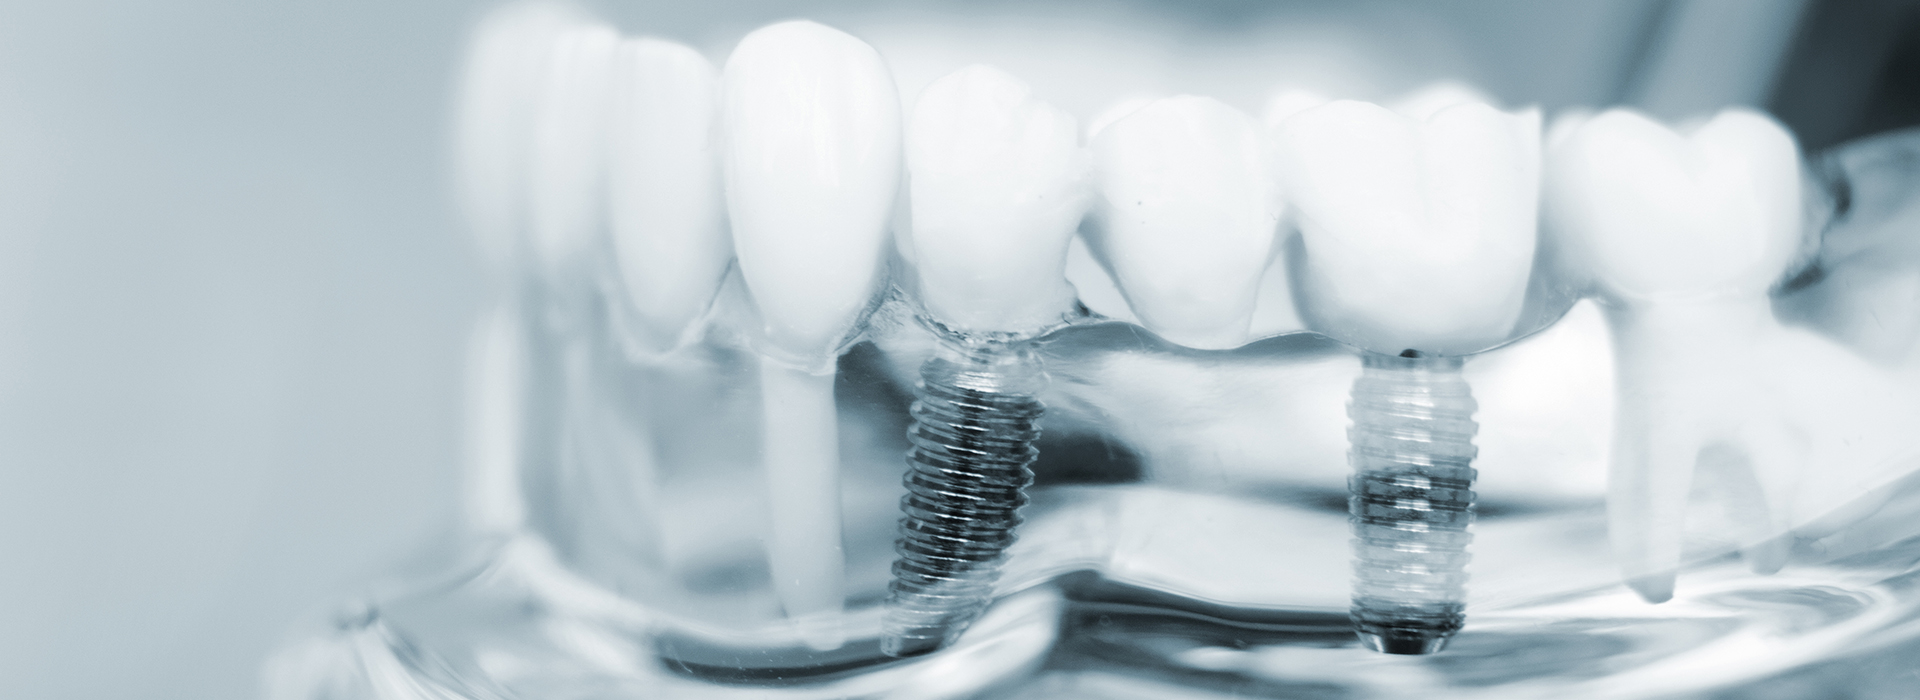 The image features a close-up of dental implants, showcasing the intricate design and structure of the artificial teeth.